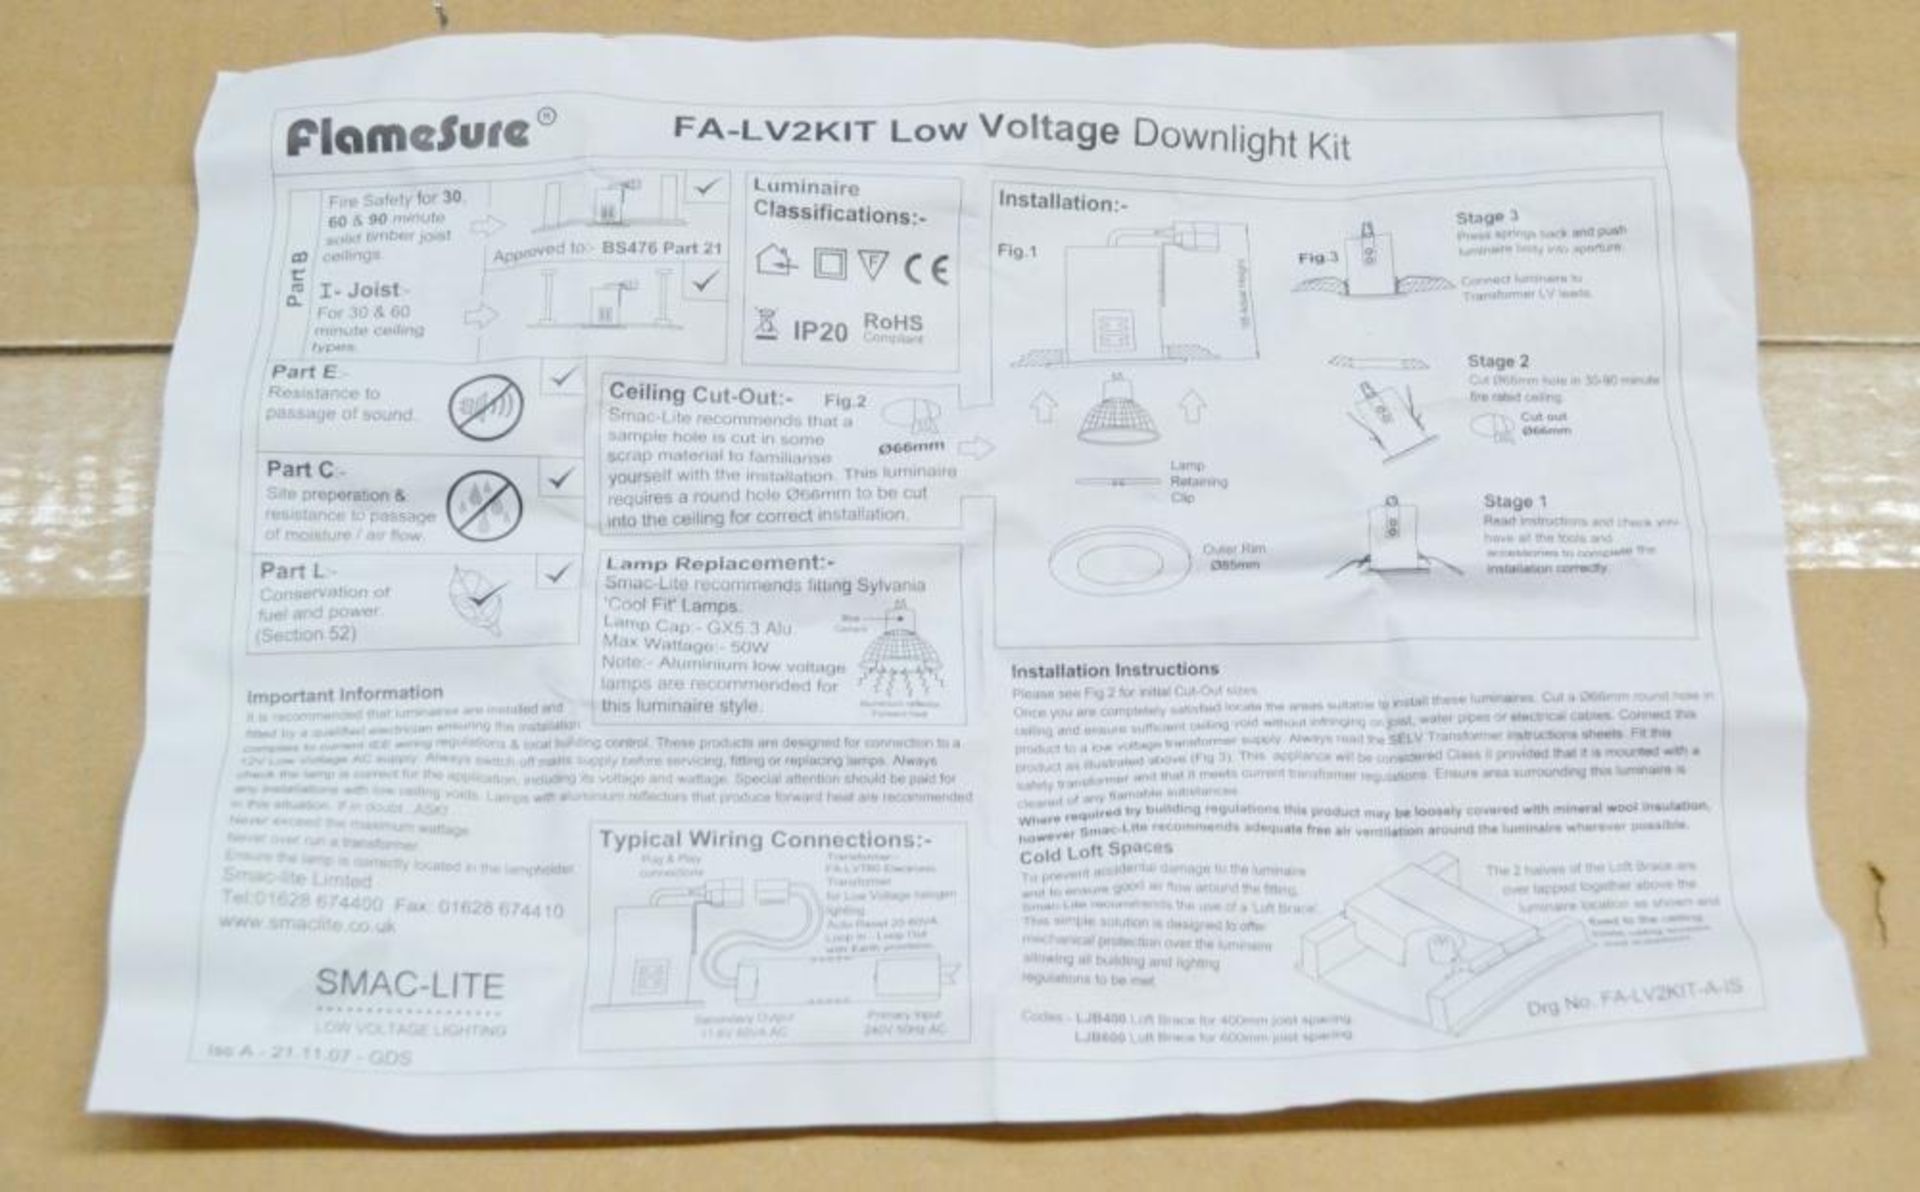 10 x Smac-lite FLAMESURE Low Voltage Fire Rated Downlight Kits - Model: FA-LV2KIT - IP20 - Includes - Image 8 of 9